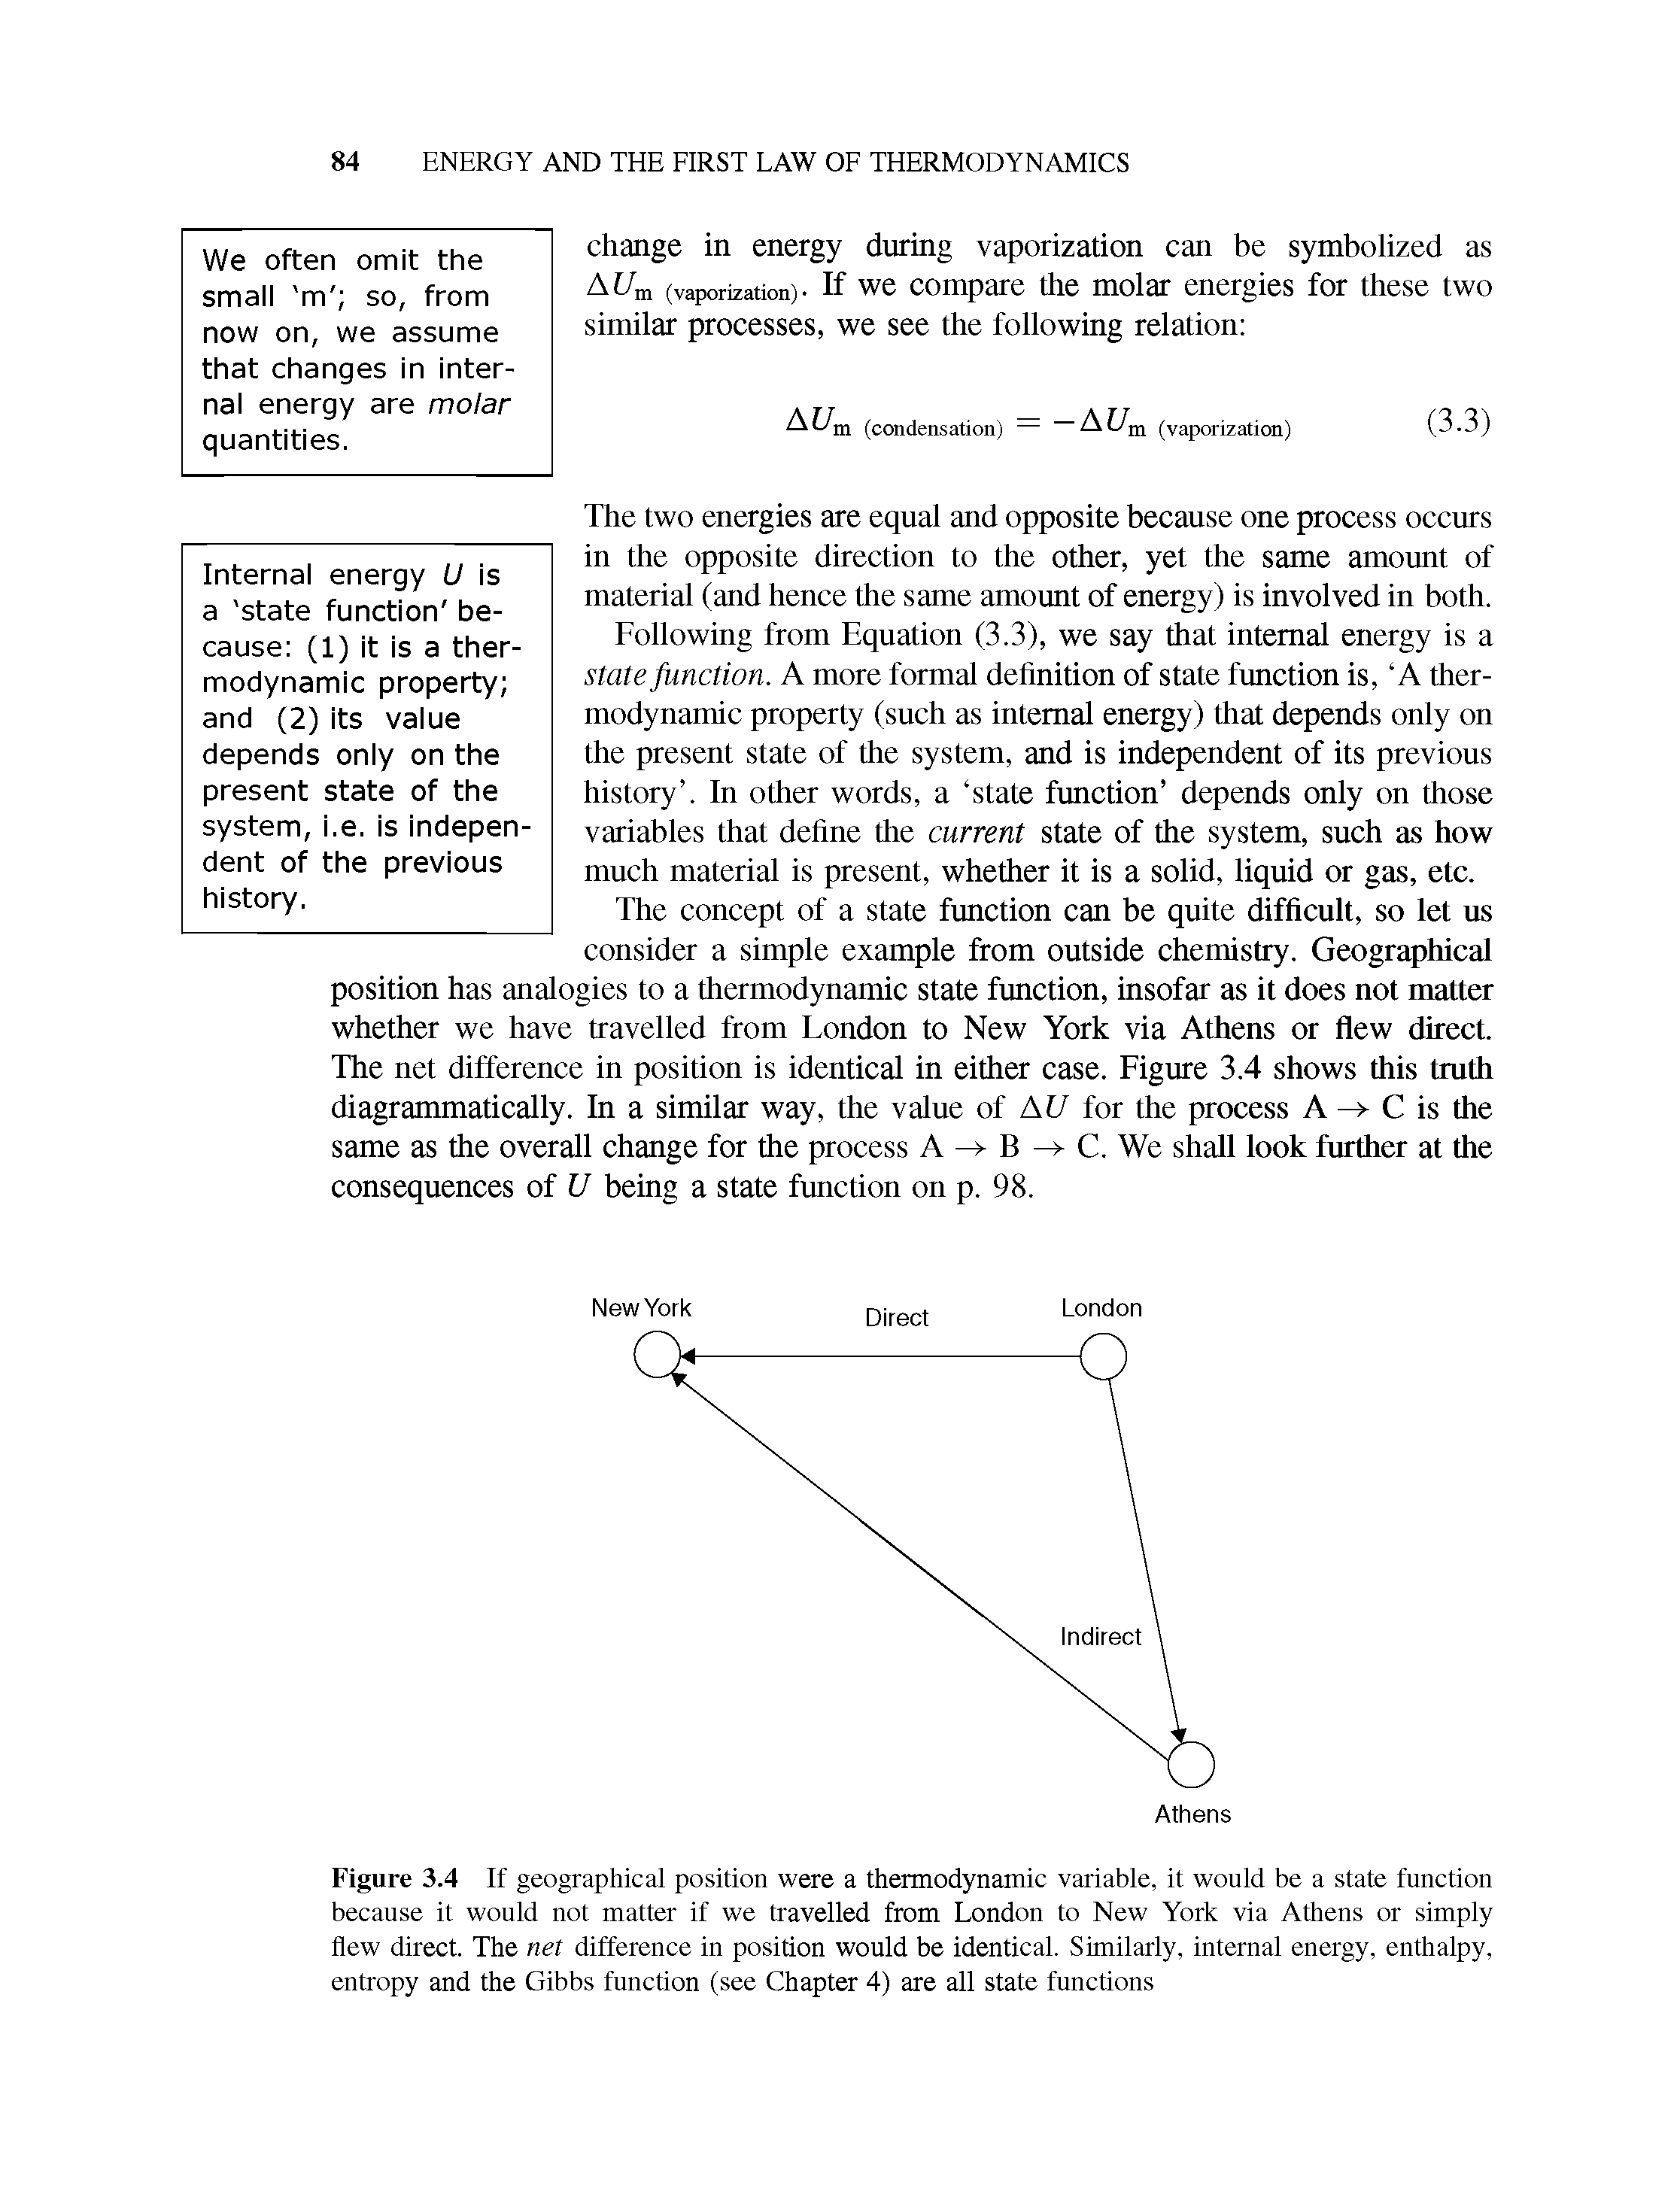 Figure 3.4 If geographical position were a thermodynamic variable, it would be a state function because it would not matter if we travelled from London to New York via Athens or simply flew direct. The net difference in position would be identical. Similarly, internal energy, enthalpy, entropy and the Gibbs function (see Chapter 4) are all state functions...